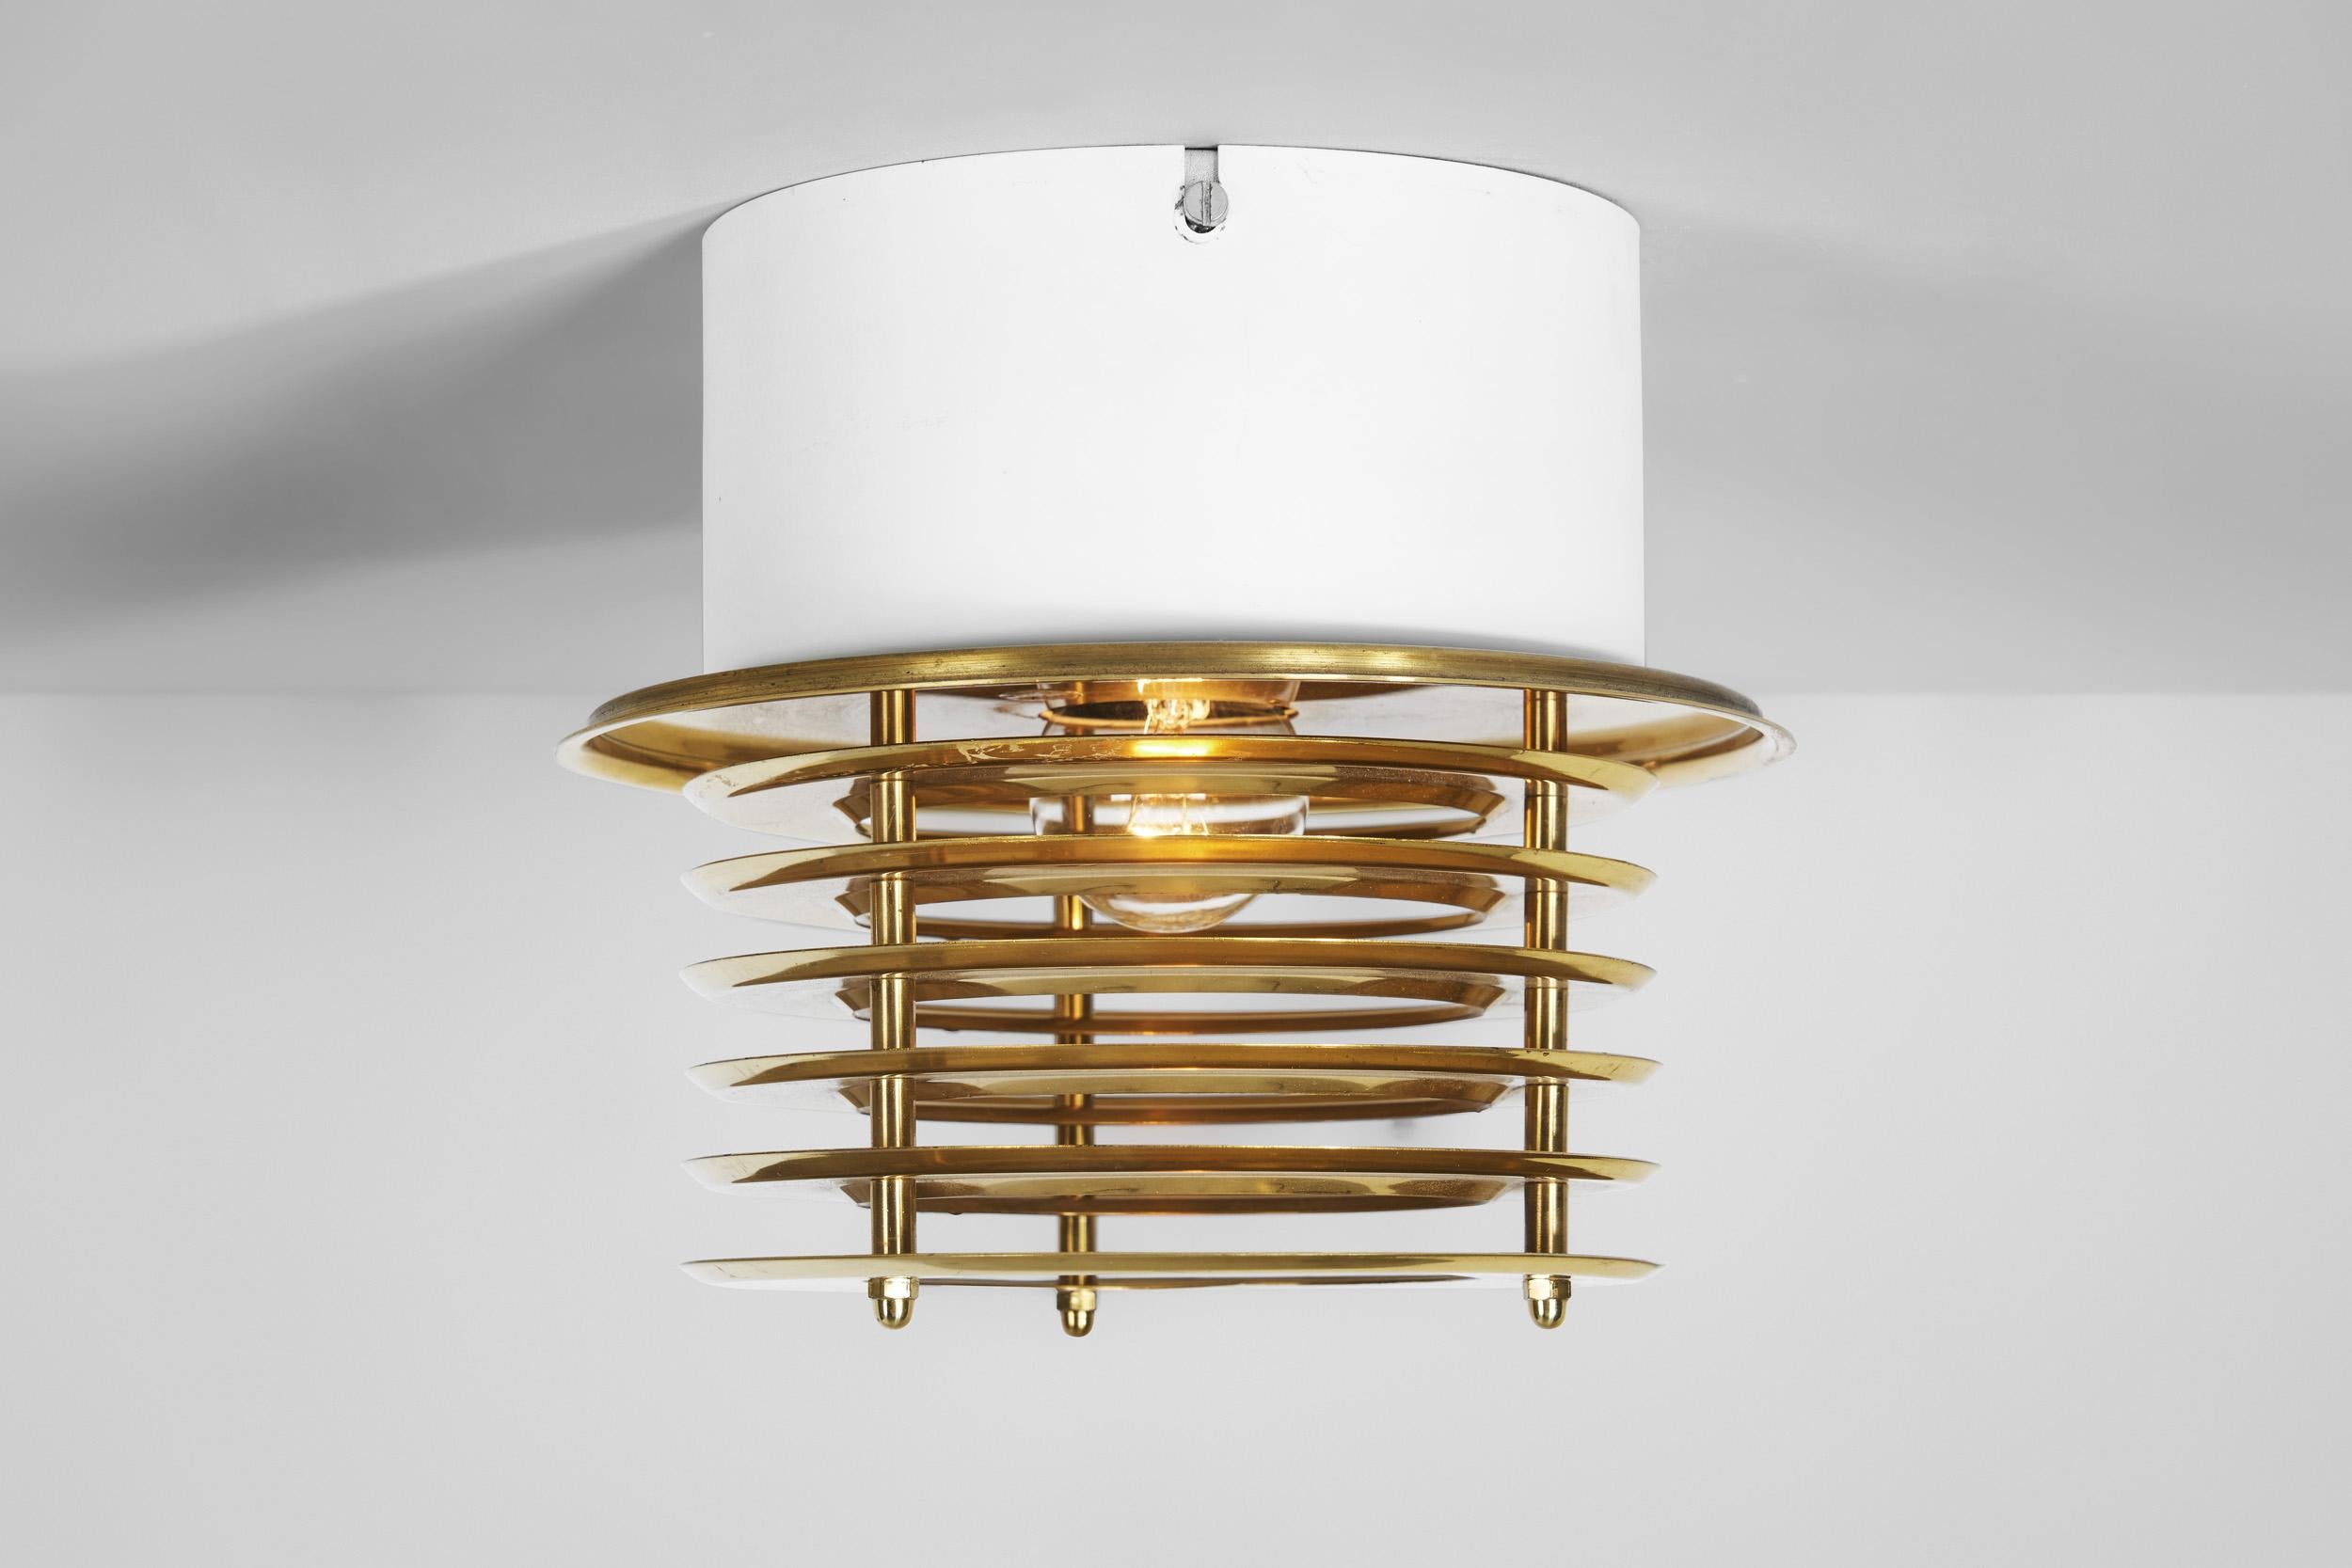 Brass and Metal Ceiling Lamps by Taiba-Falkenberg Belysnin, Sweden 1960s For Sale 2